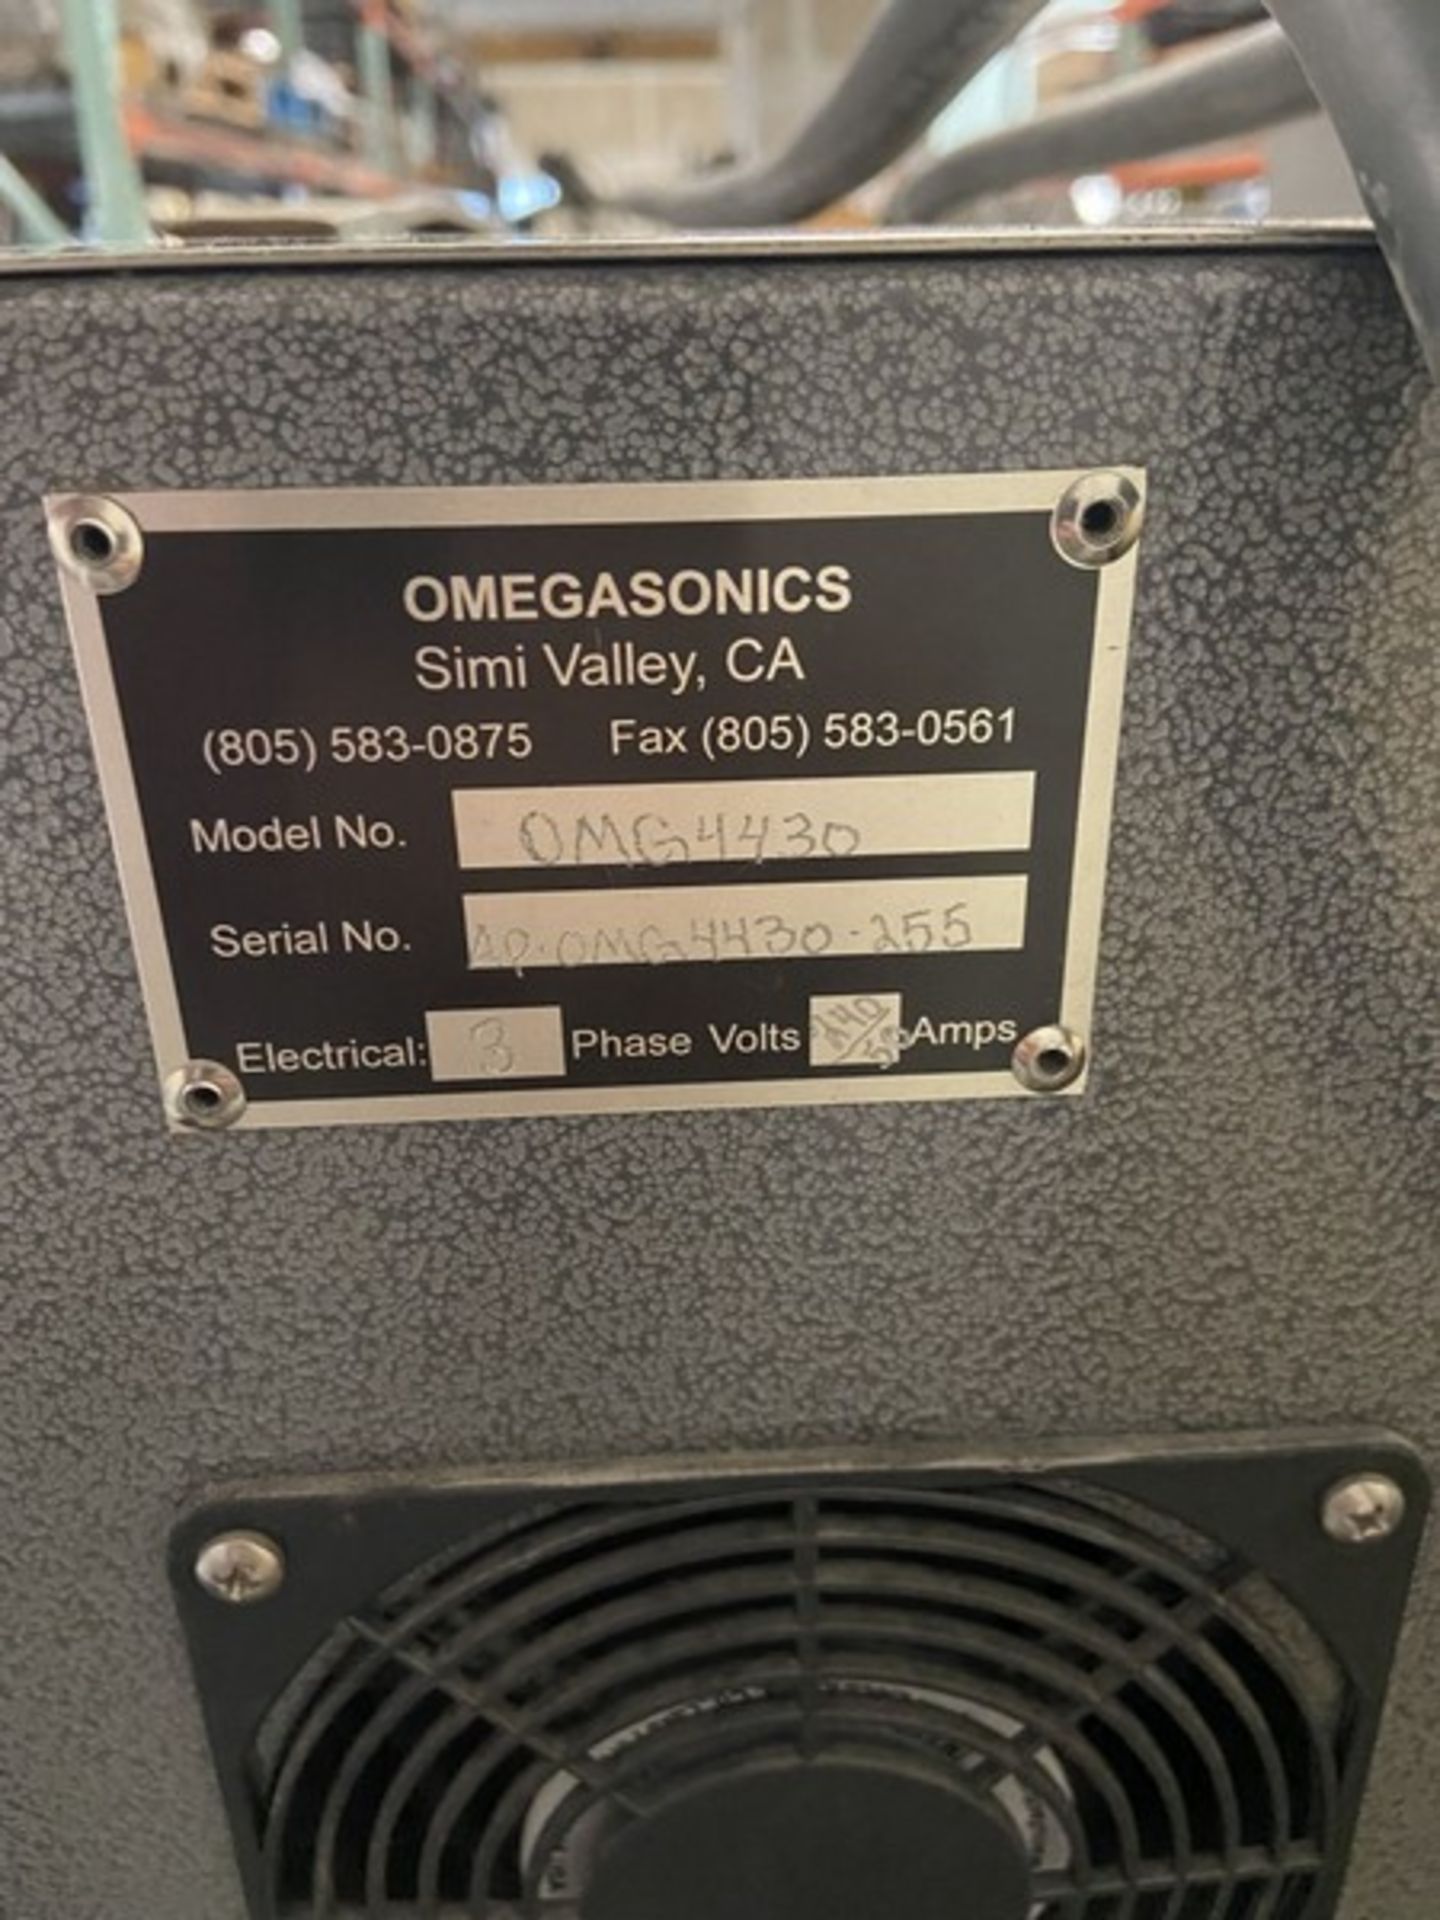 Omegasonics Parts Washer. Model: OMG4430, Serial: APOMG4430-255, Age: Purchased in 2015, Power - Image 6 of 7